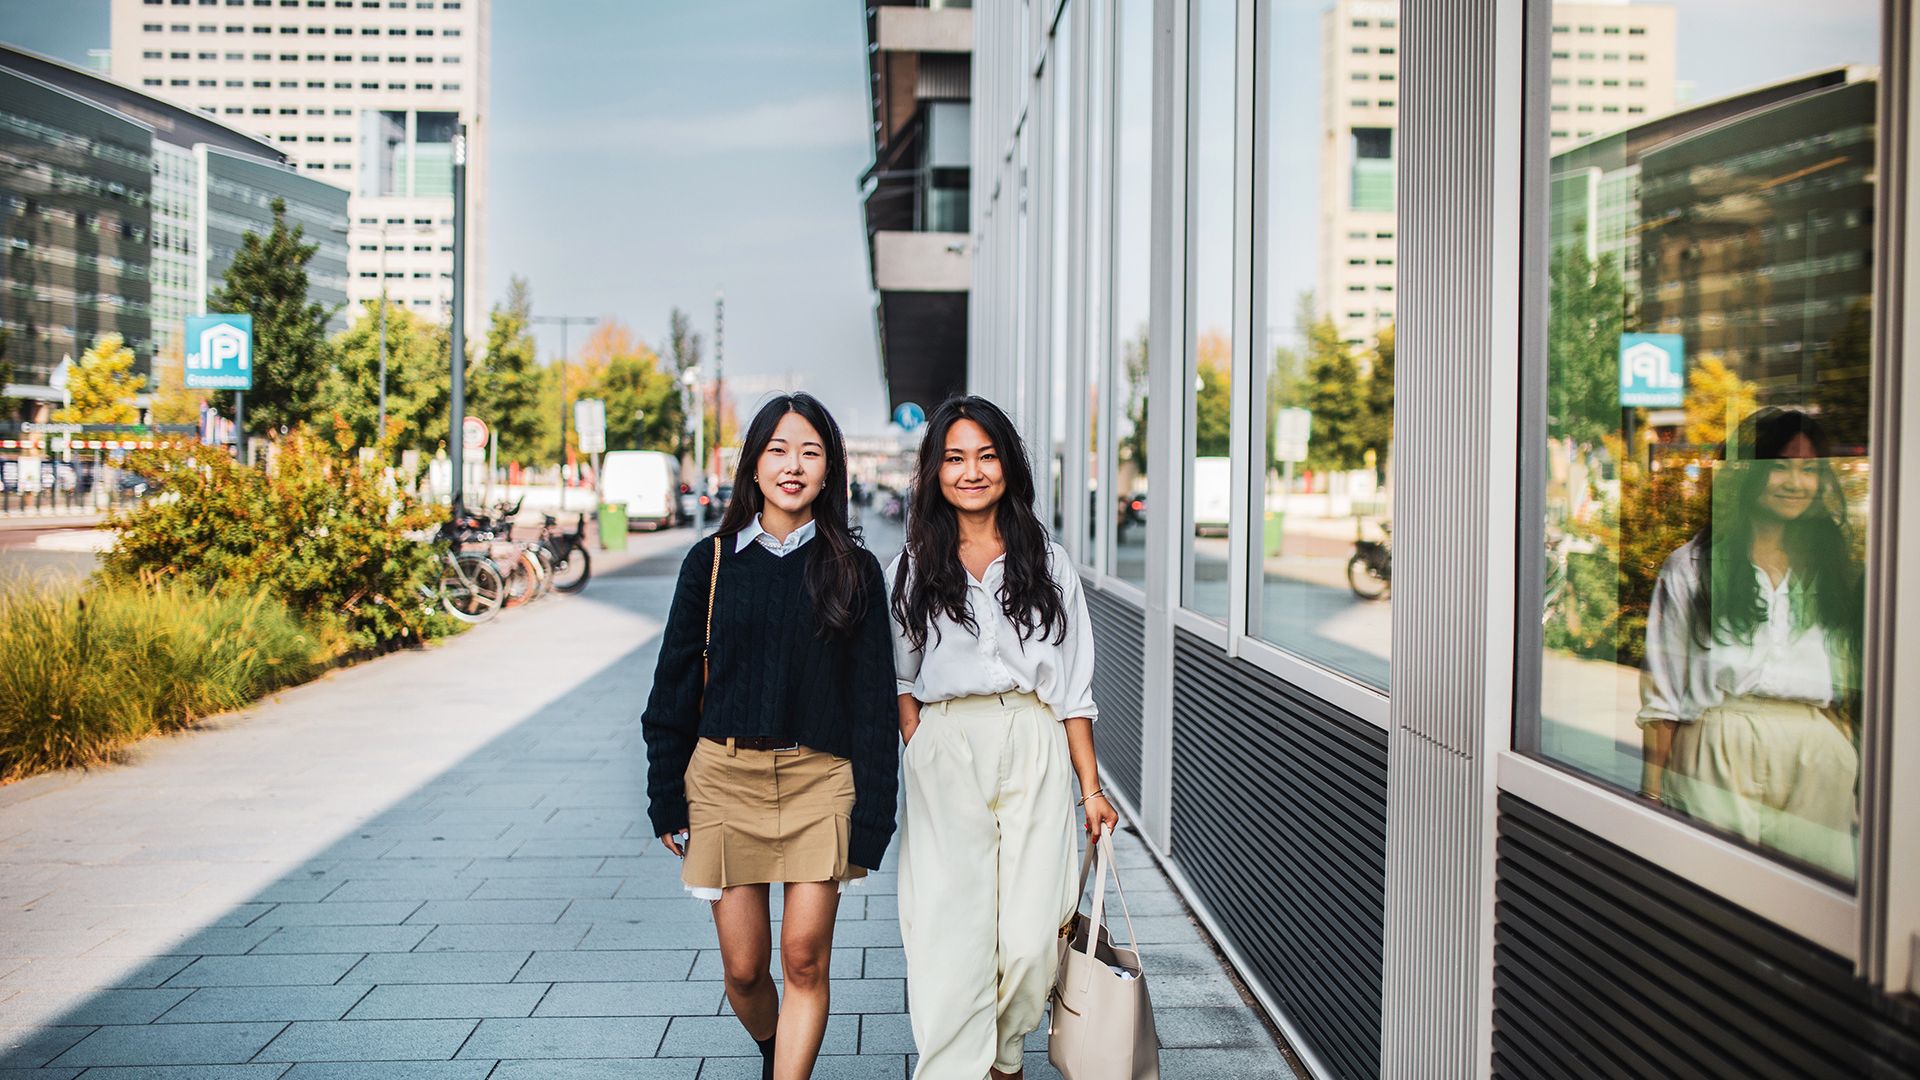 Young women walking next to office building.